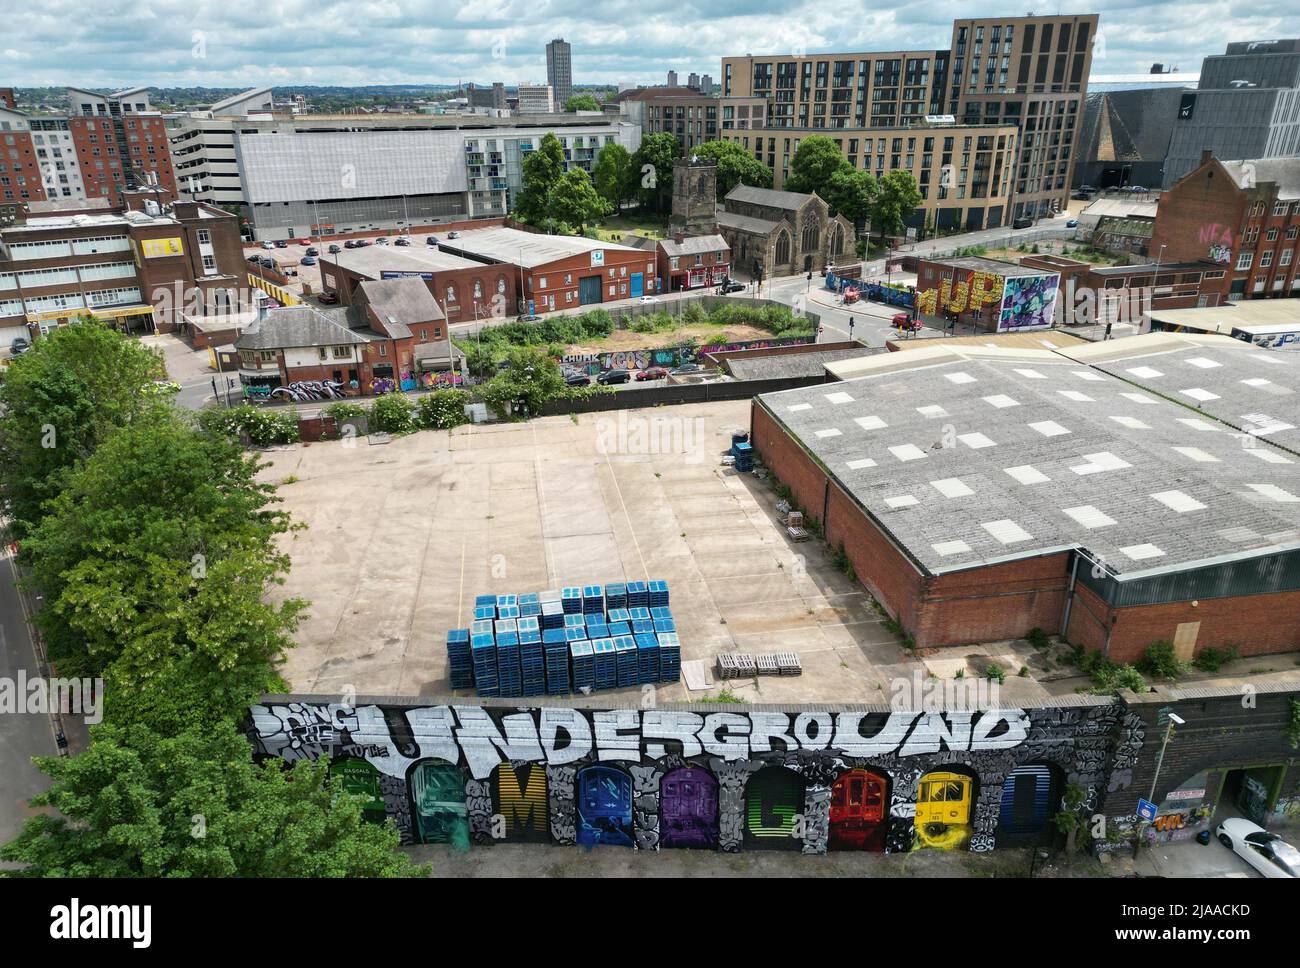 Leicester, Leicestershire, UK. 29th May 2022.  A general view of murals in the Frog Island area during the Bring the Paint event. The award winning International Street Art Festival attracts artists from all over the world. Credit Darren Staples/Alamy Live News. Stock Photo